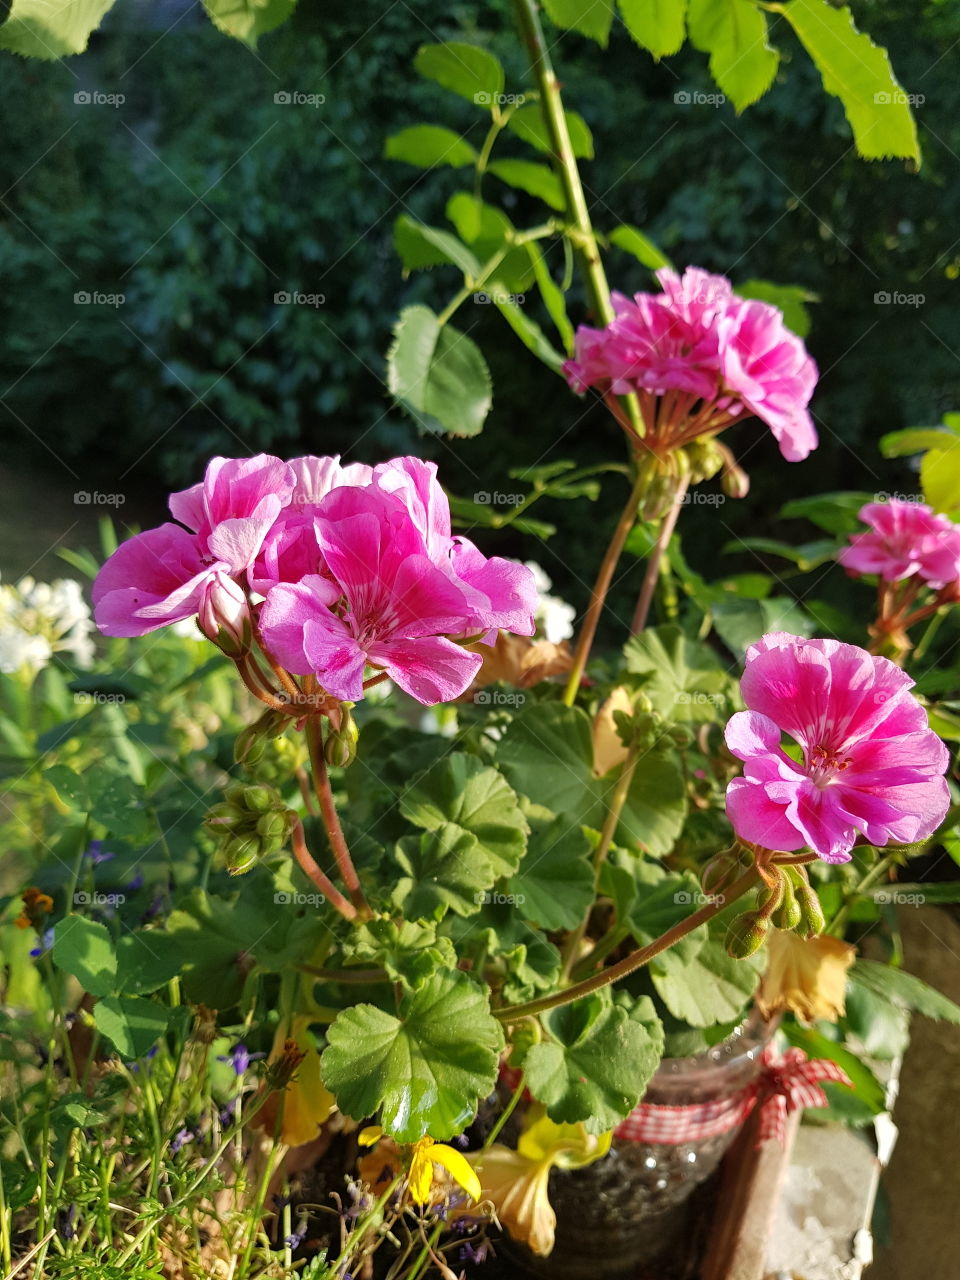 Some pink flowers in the Sun